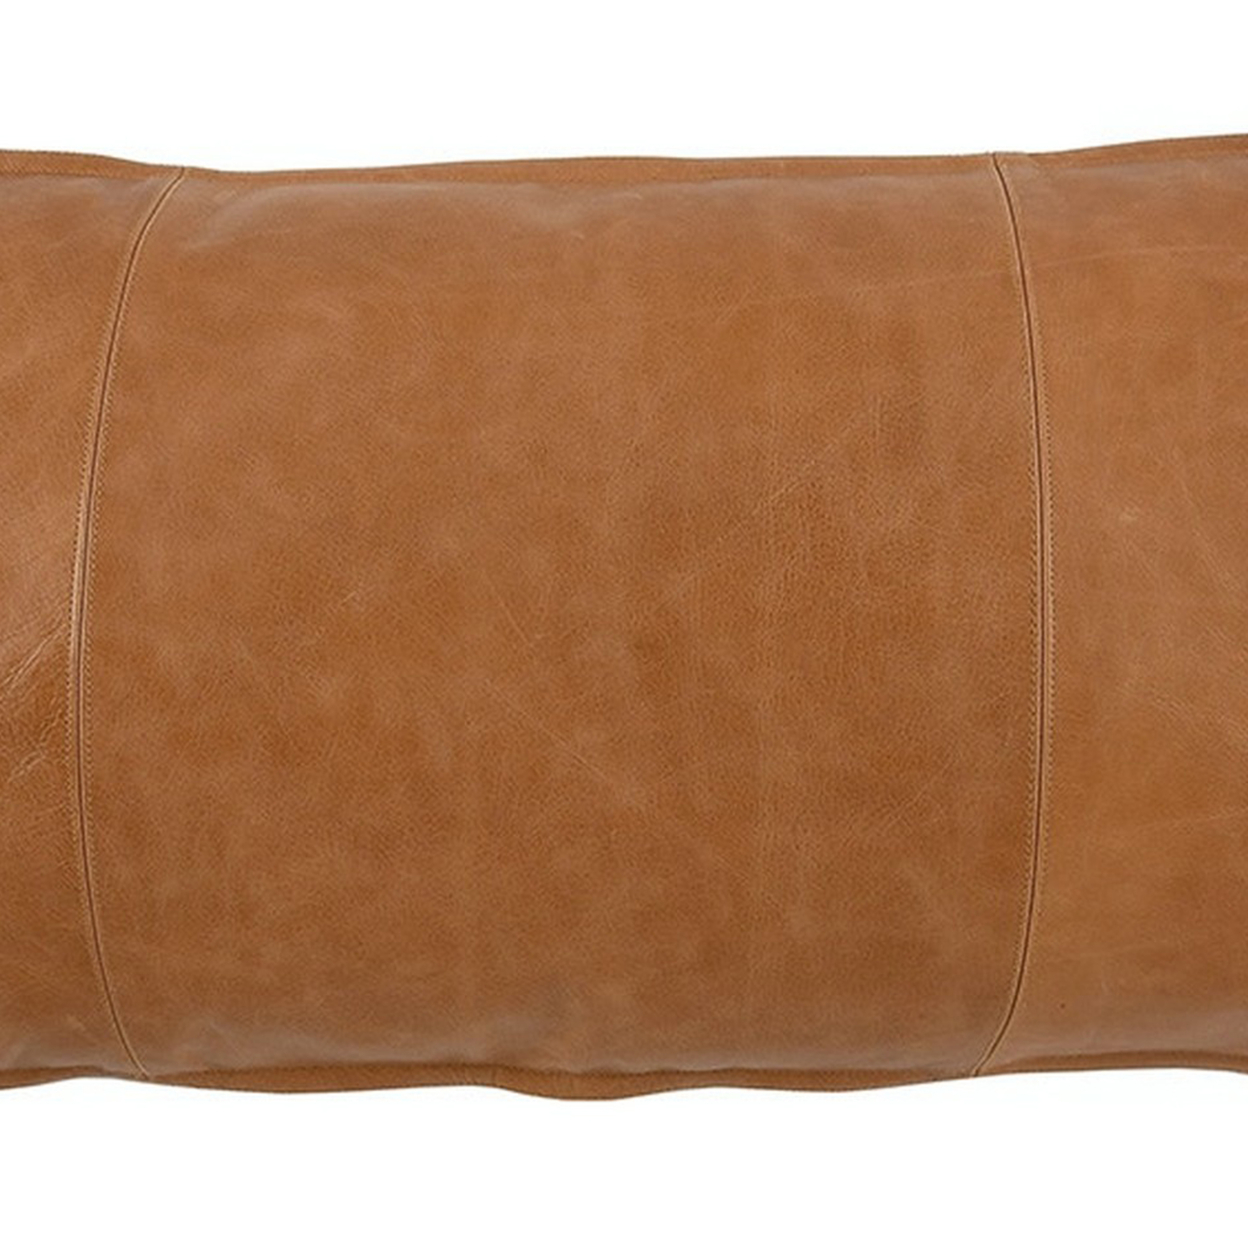 Rectangular Leatherette Throw Pillow With Stitched Details, Large, Brown- Saltoro Sherpi